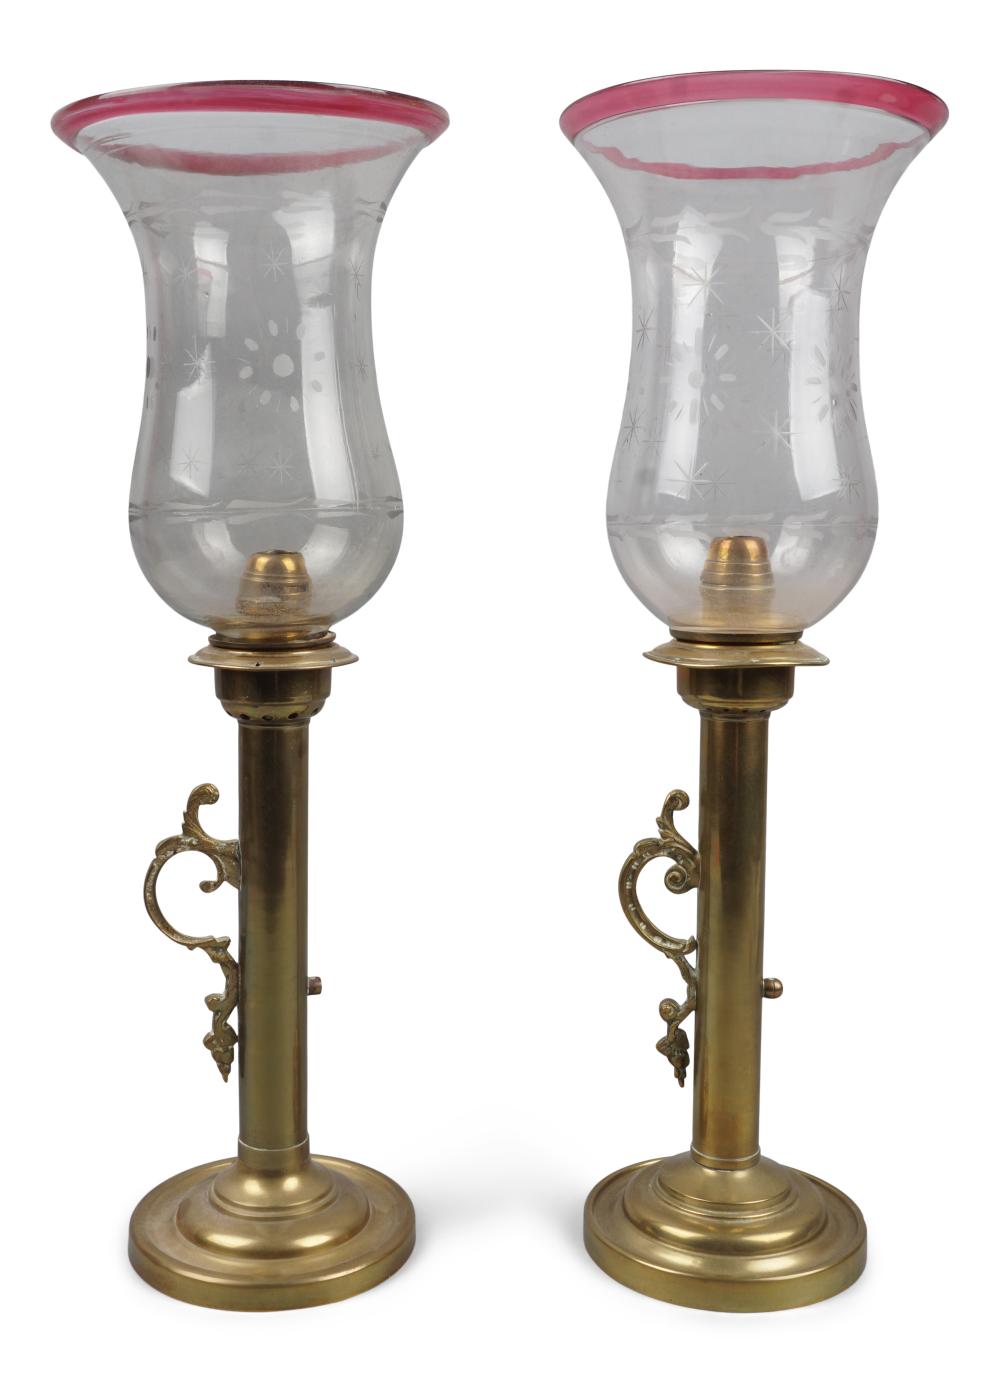 PAIR OF BRASS LAMPS WITH CRANBERRY